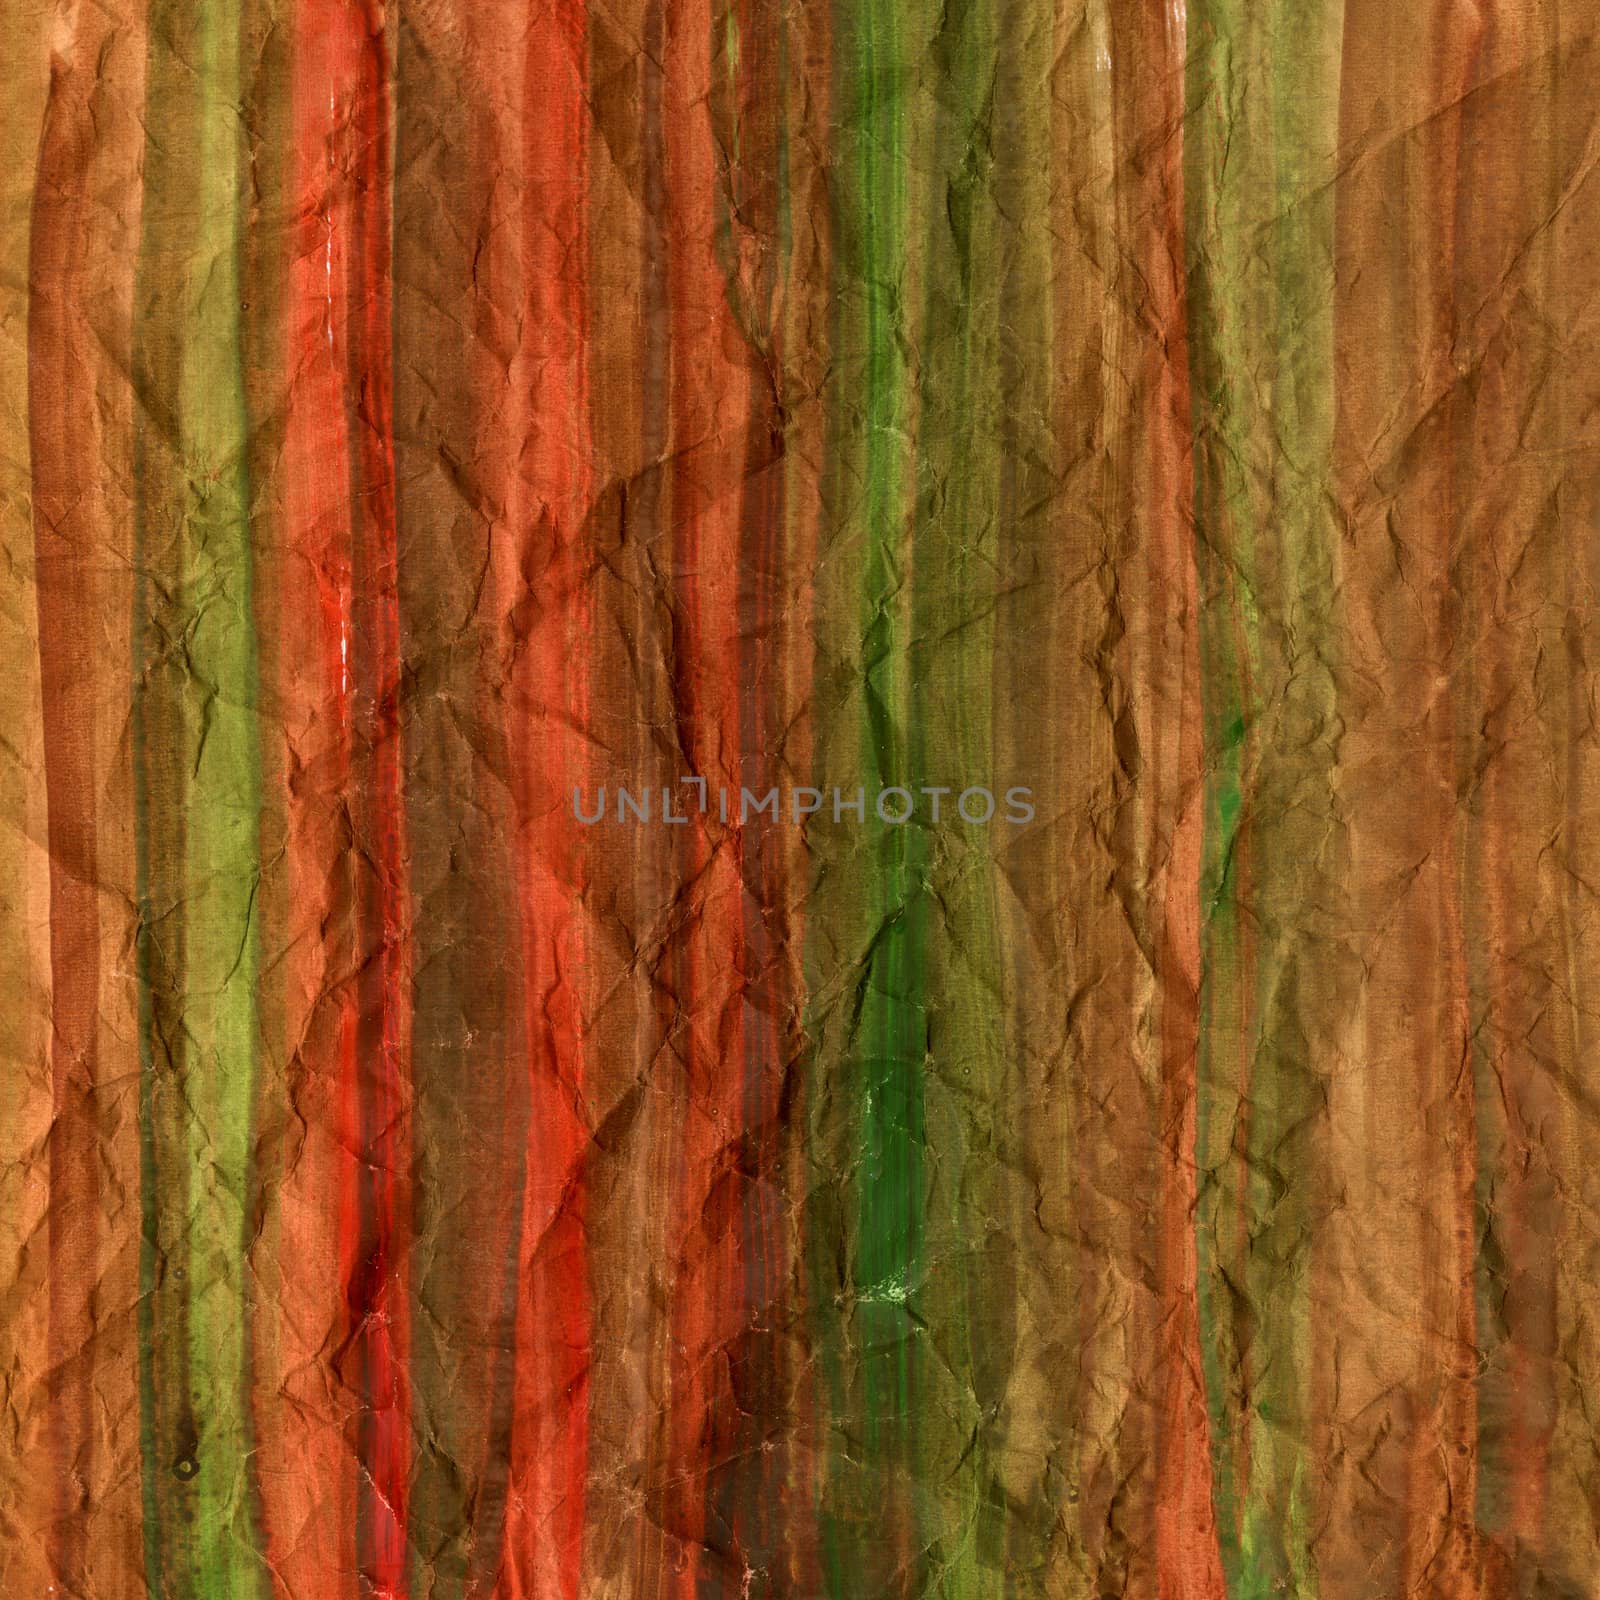 red brown and green watercolor background painted on crumpled printing paper with vertical brush strokes, rough texture, self made